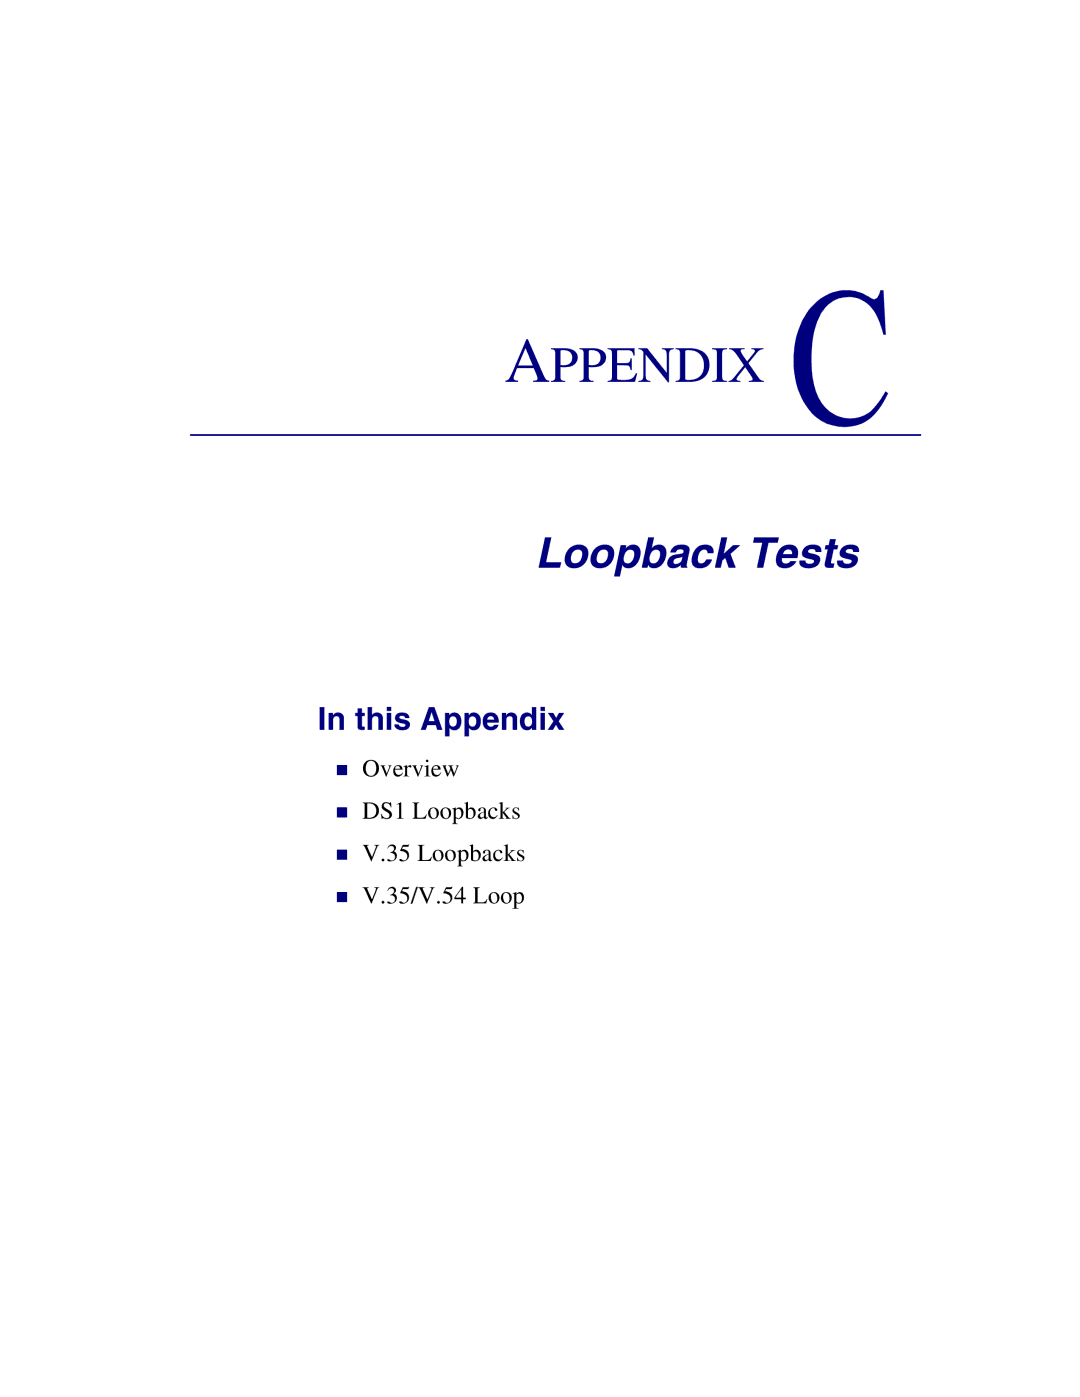 Carrier Access Axxius 800 user manual Loopback Tests 